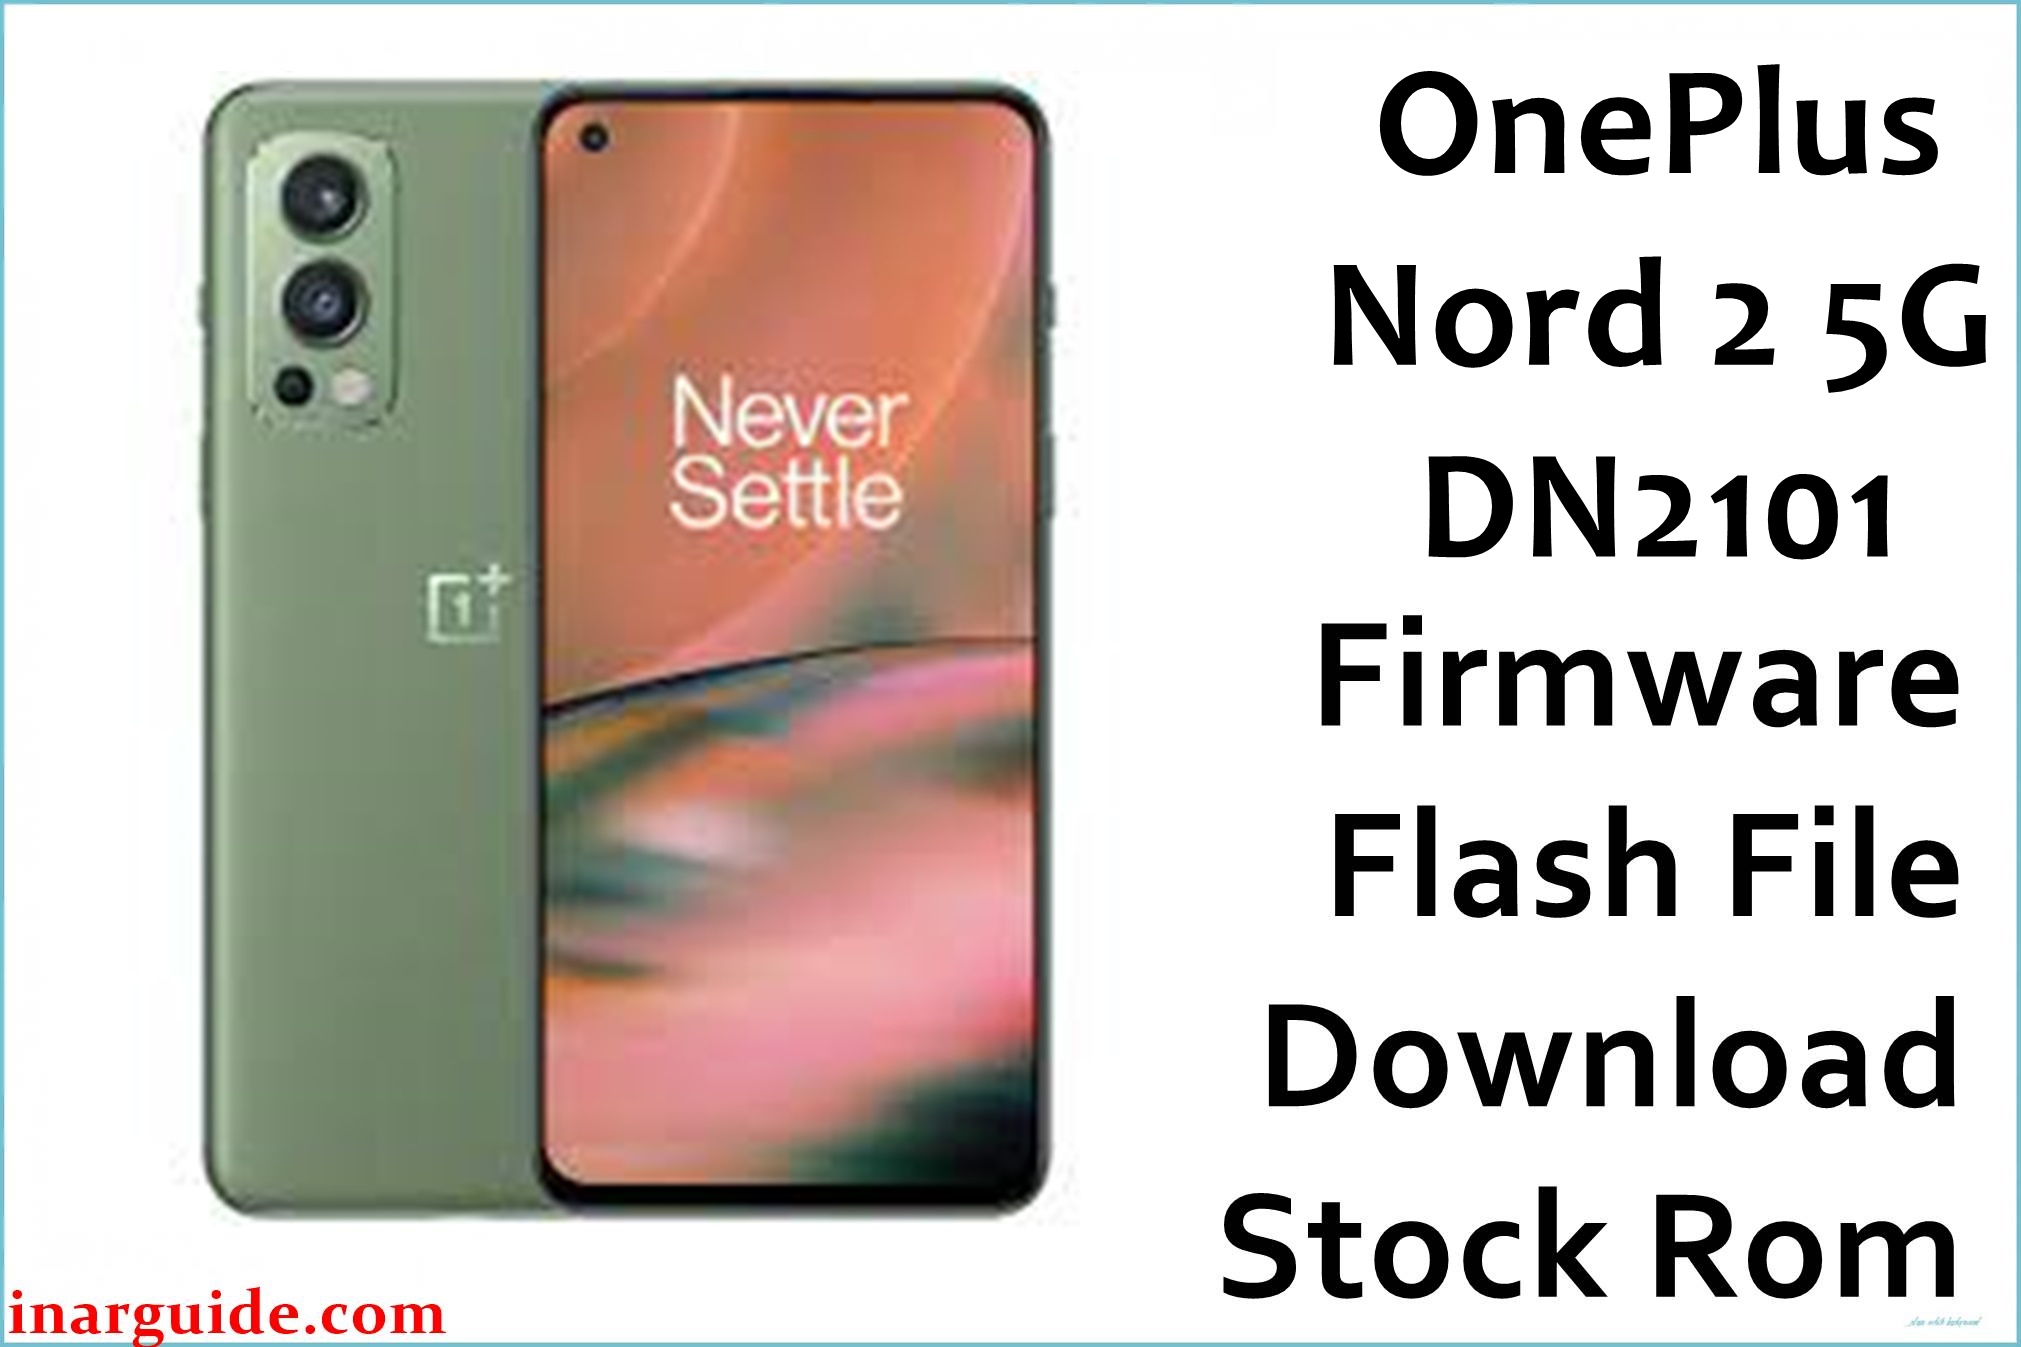 OnePlus Nord 2 5G DN2101